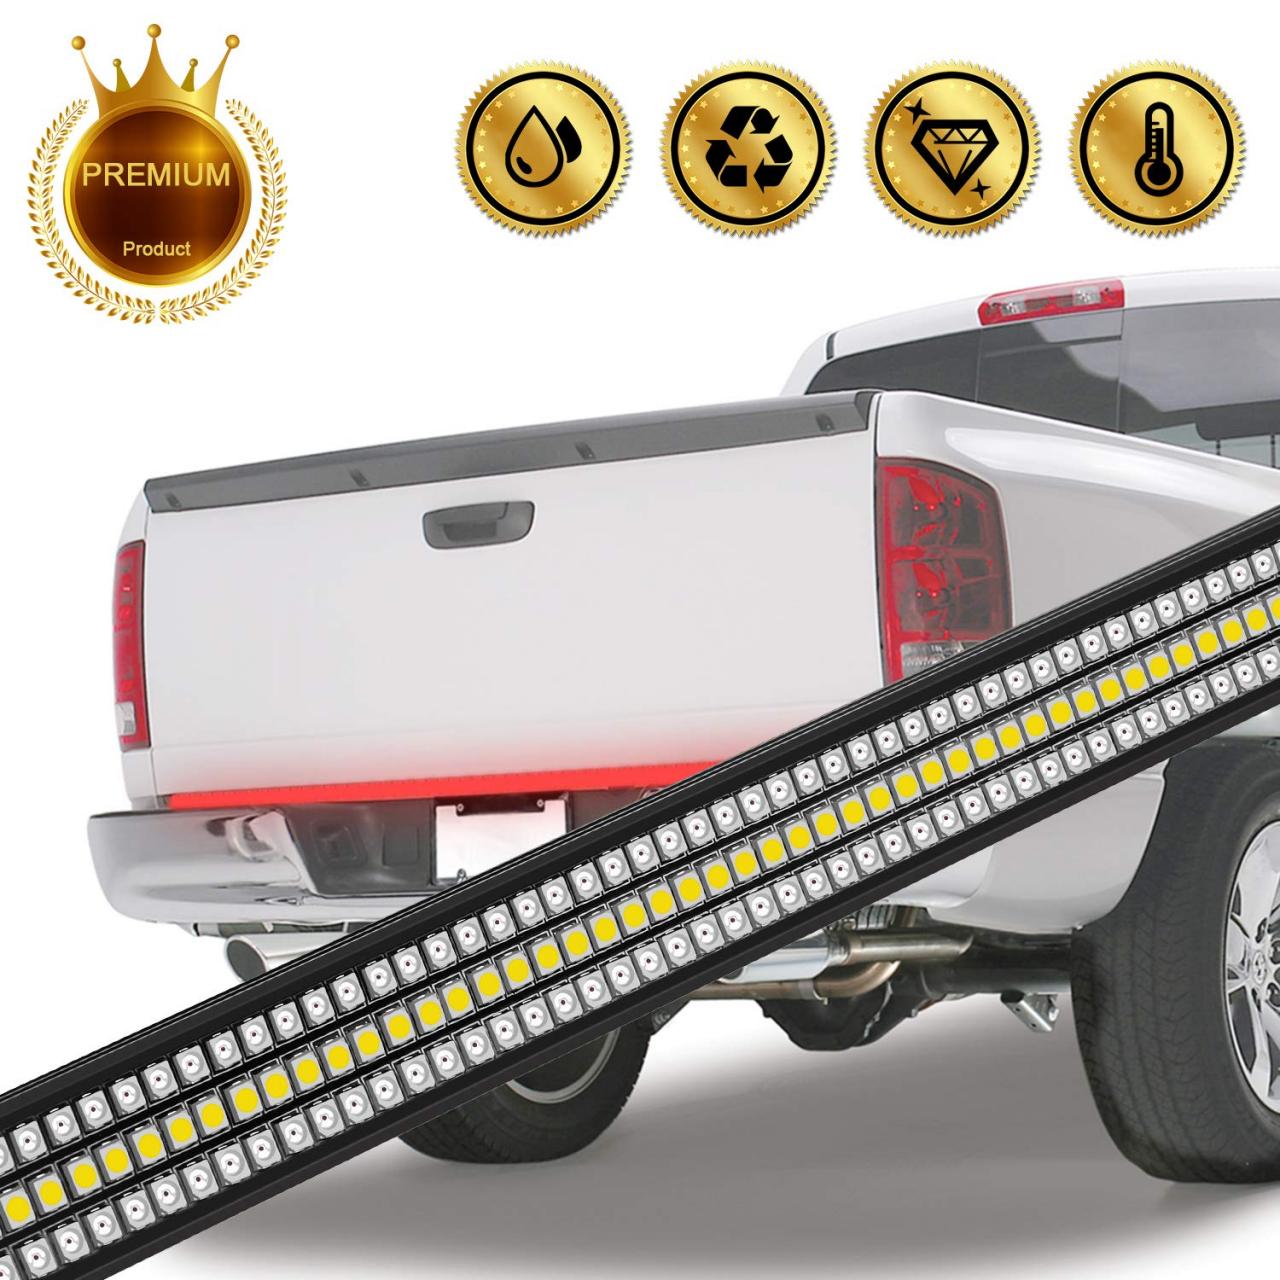 PROAUTO PROBASTO 60 inch Waterproof LED Truck Tailgate Light Bar Strips  with Reverse Brake Running Turn Signal function White/Red for Pick-up Truck  SUV Ford Pickup, Dodge Ram Pickup, Chevrolet Silverado Lights &